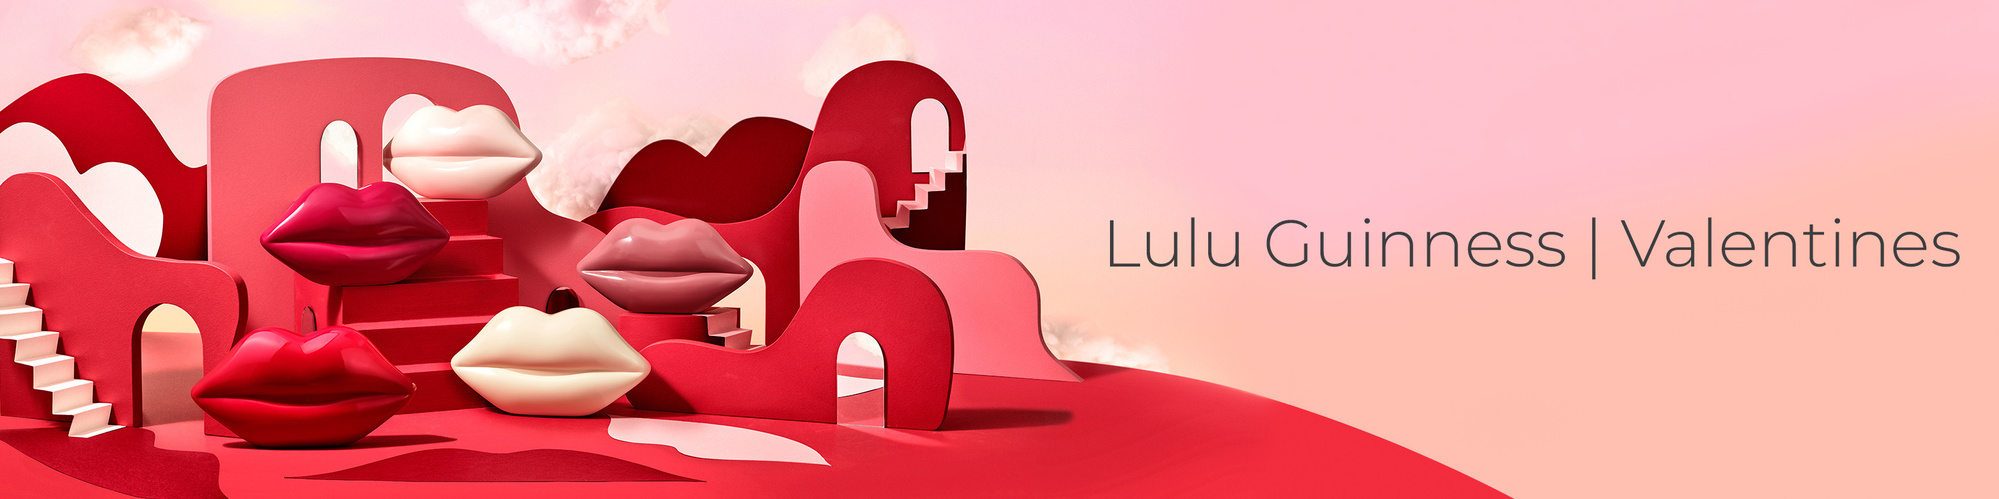 David Lineton Still Life Photographer Recent work with Lulu Guinness. Valentines Campaign on Cloud Lulu. Products sitting on curved vibrant red plinths and set. 